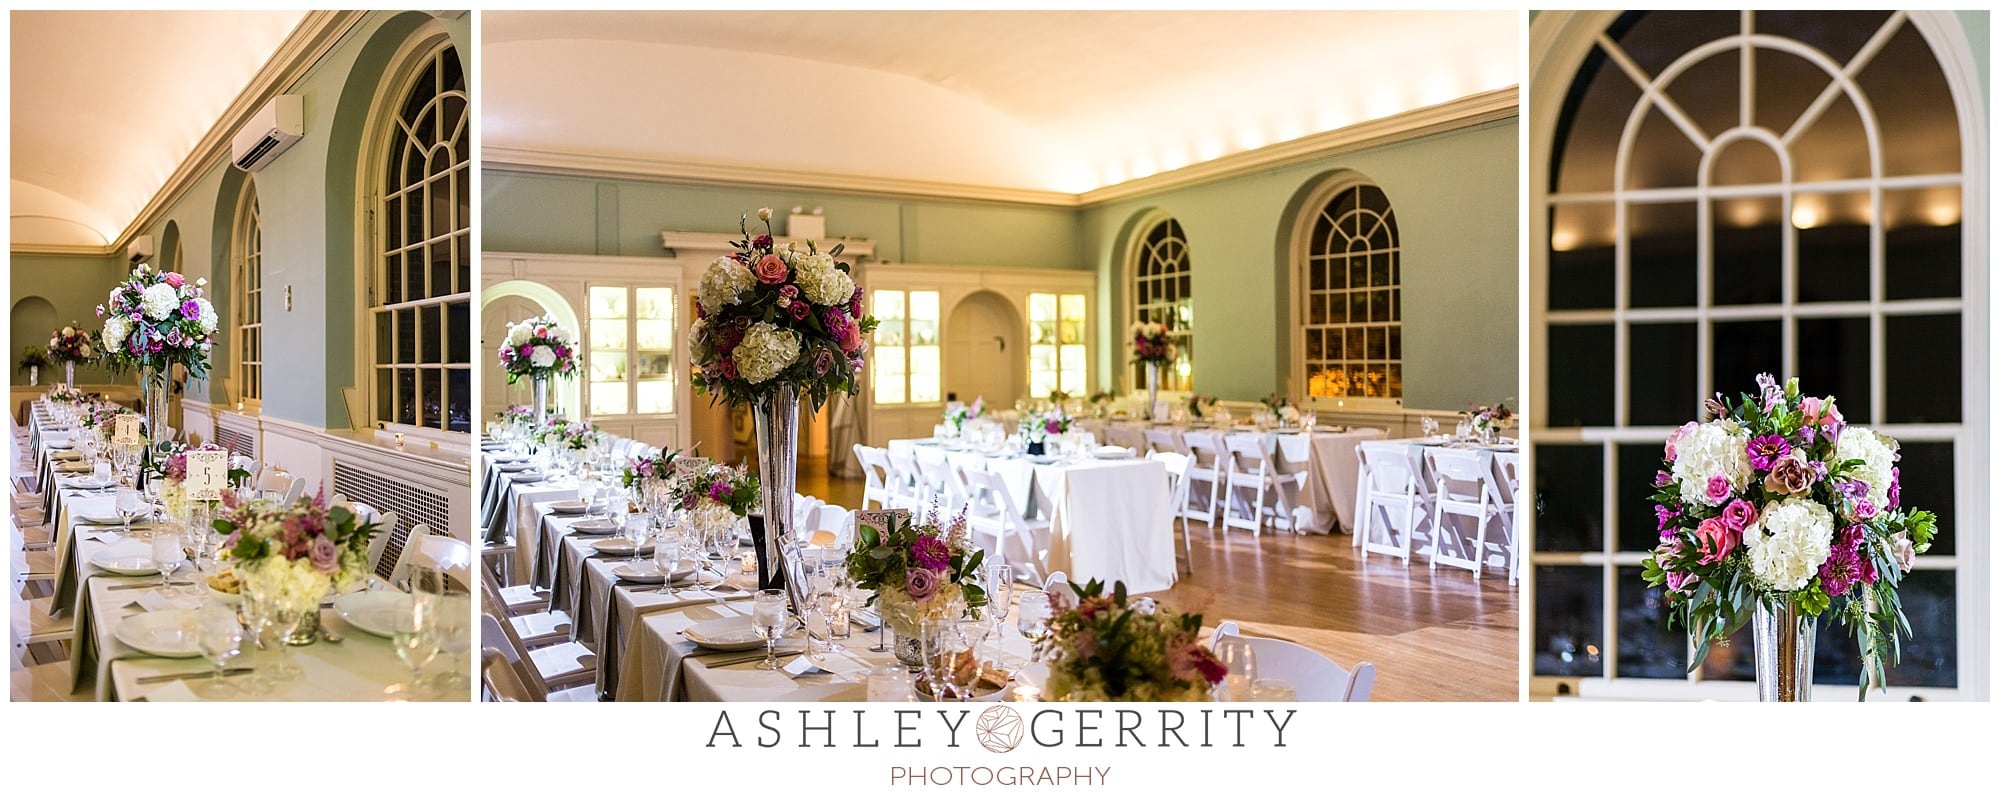 Long rows of tables are decorated with towering floral centerpieces paired with smaller arrangements in the ballroom at the Colonial Dames in Philadelphia.